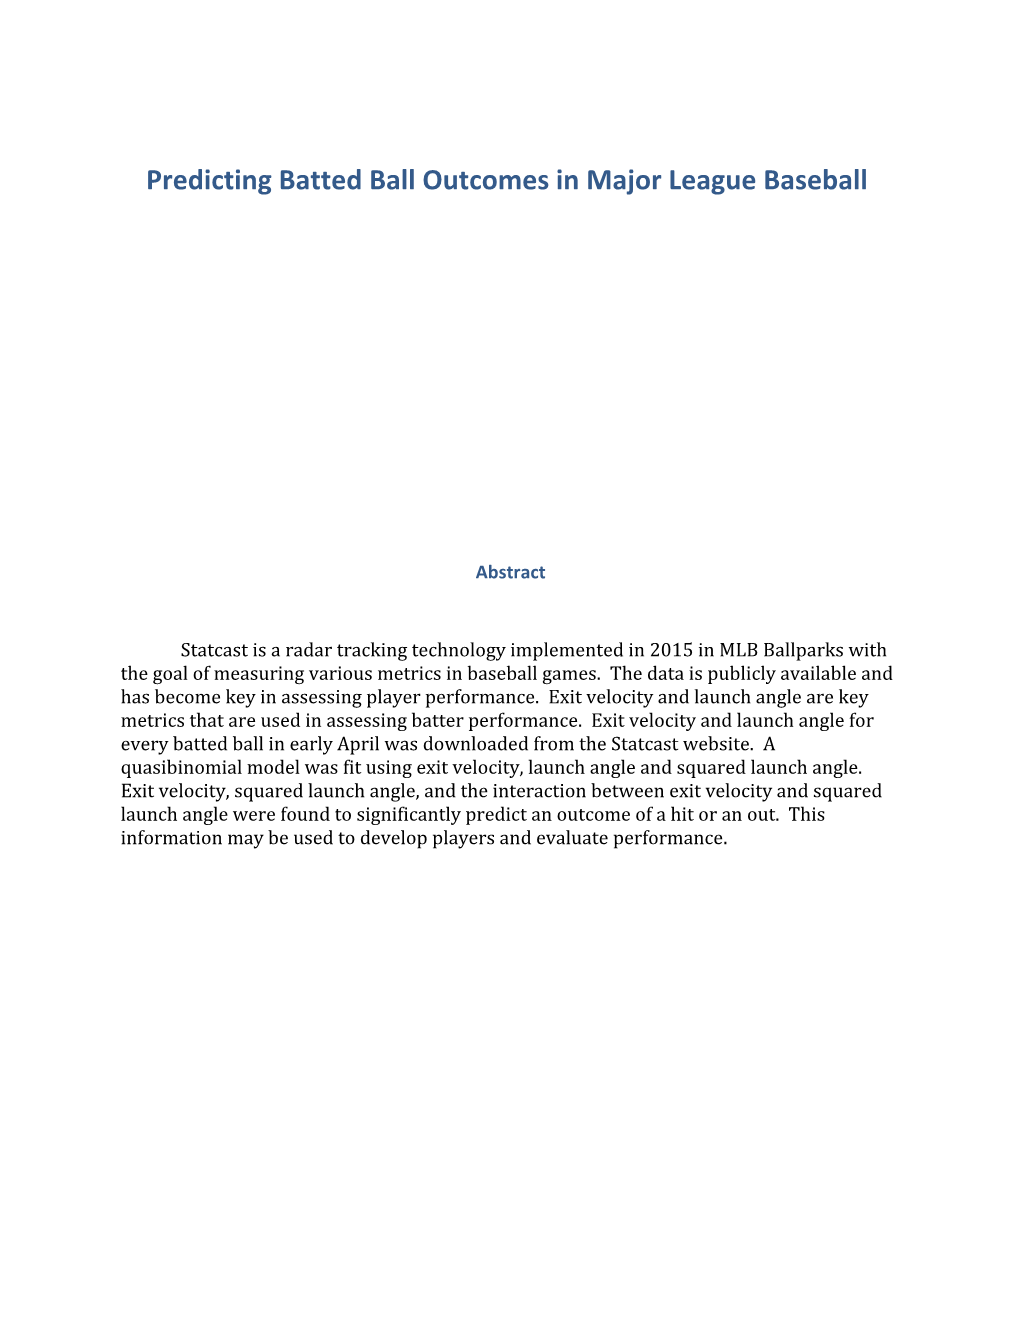 Predicting Batted Ball Outcomes in Major League Baseball